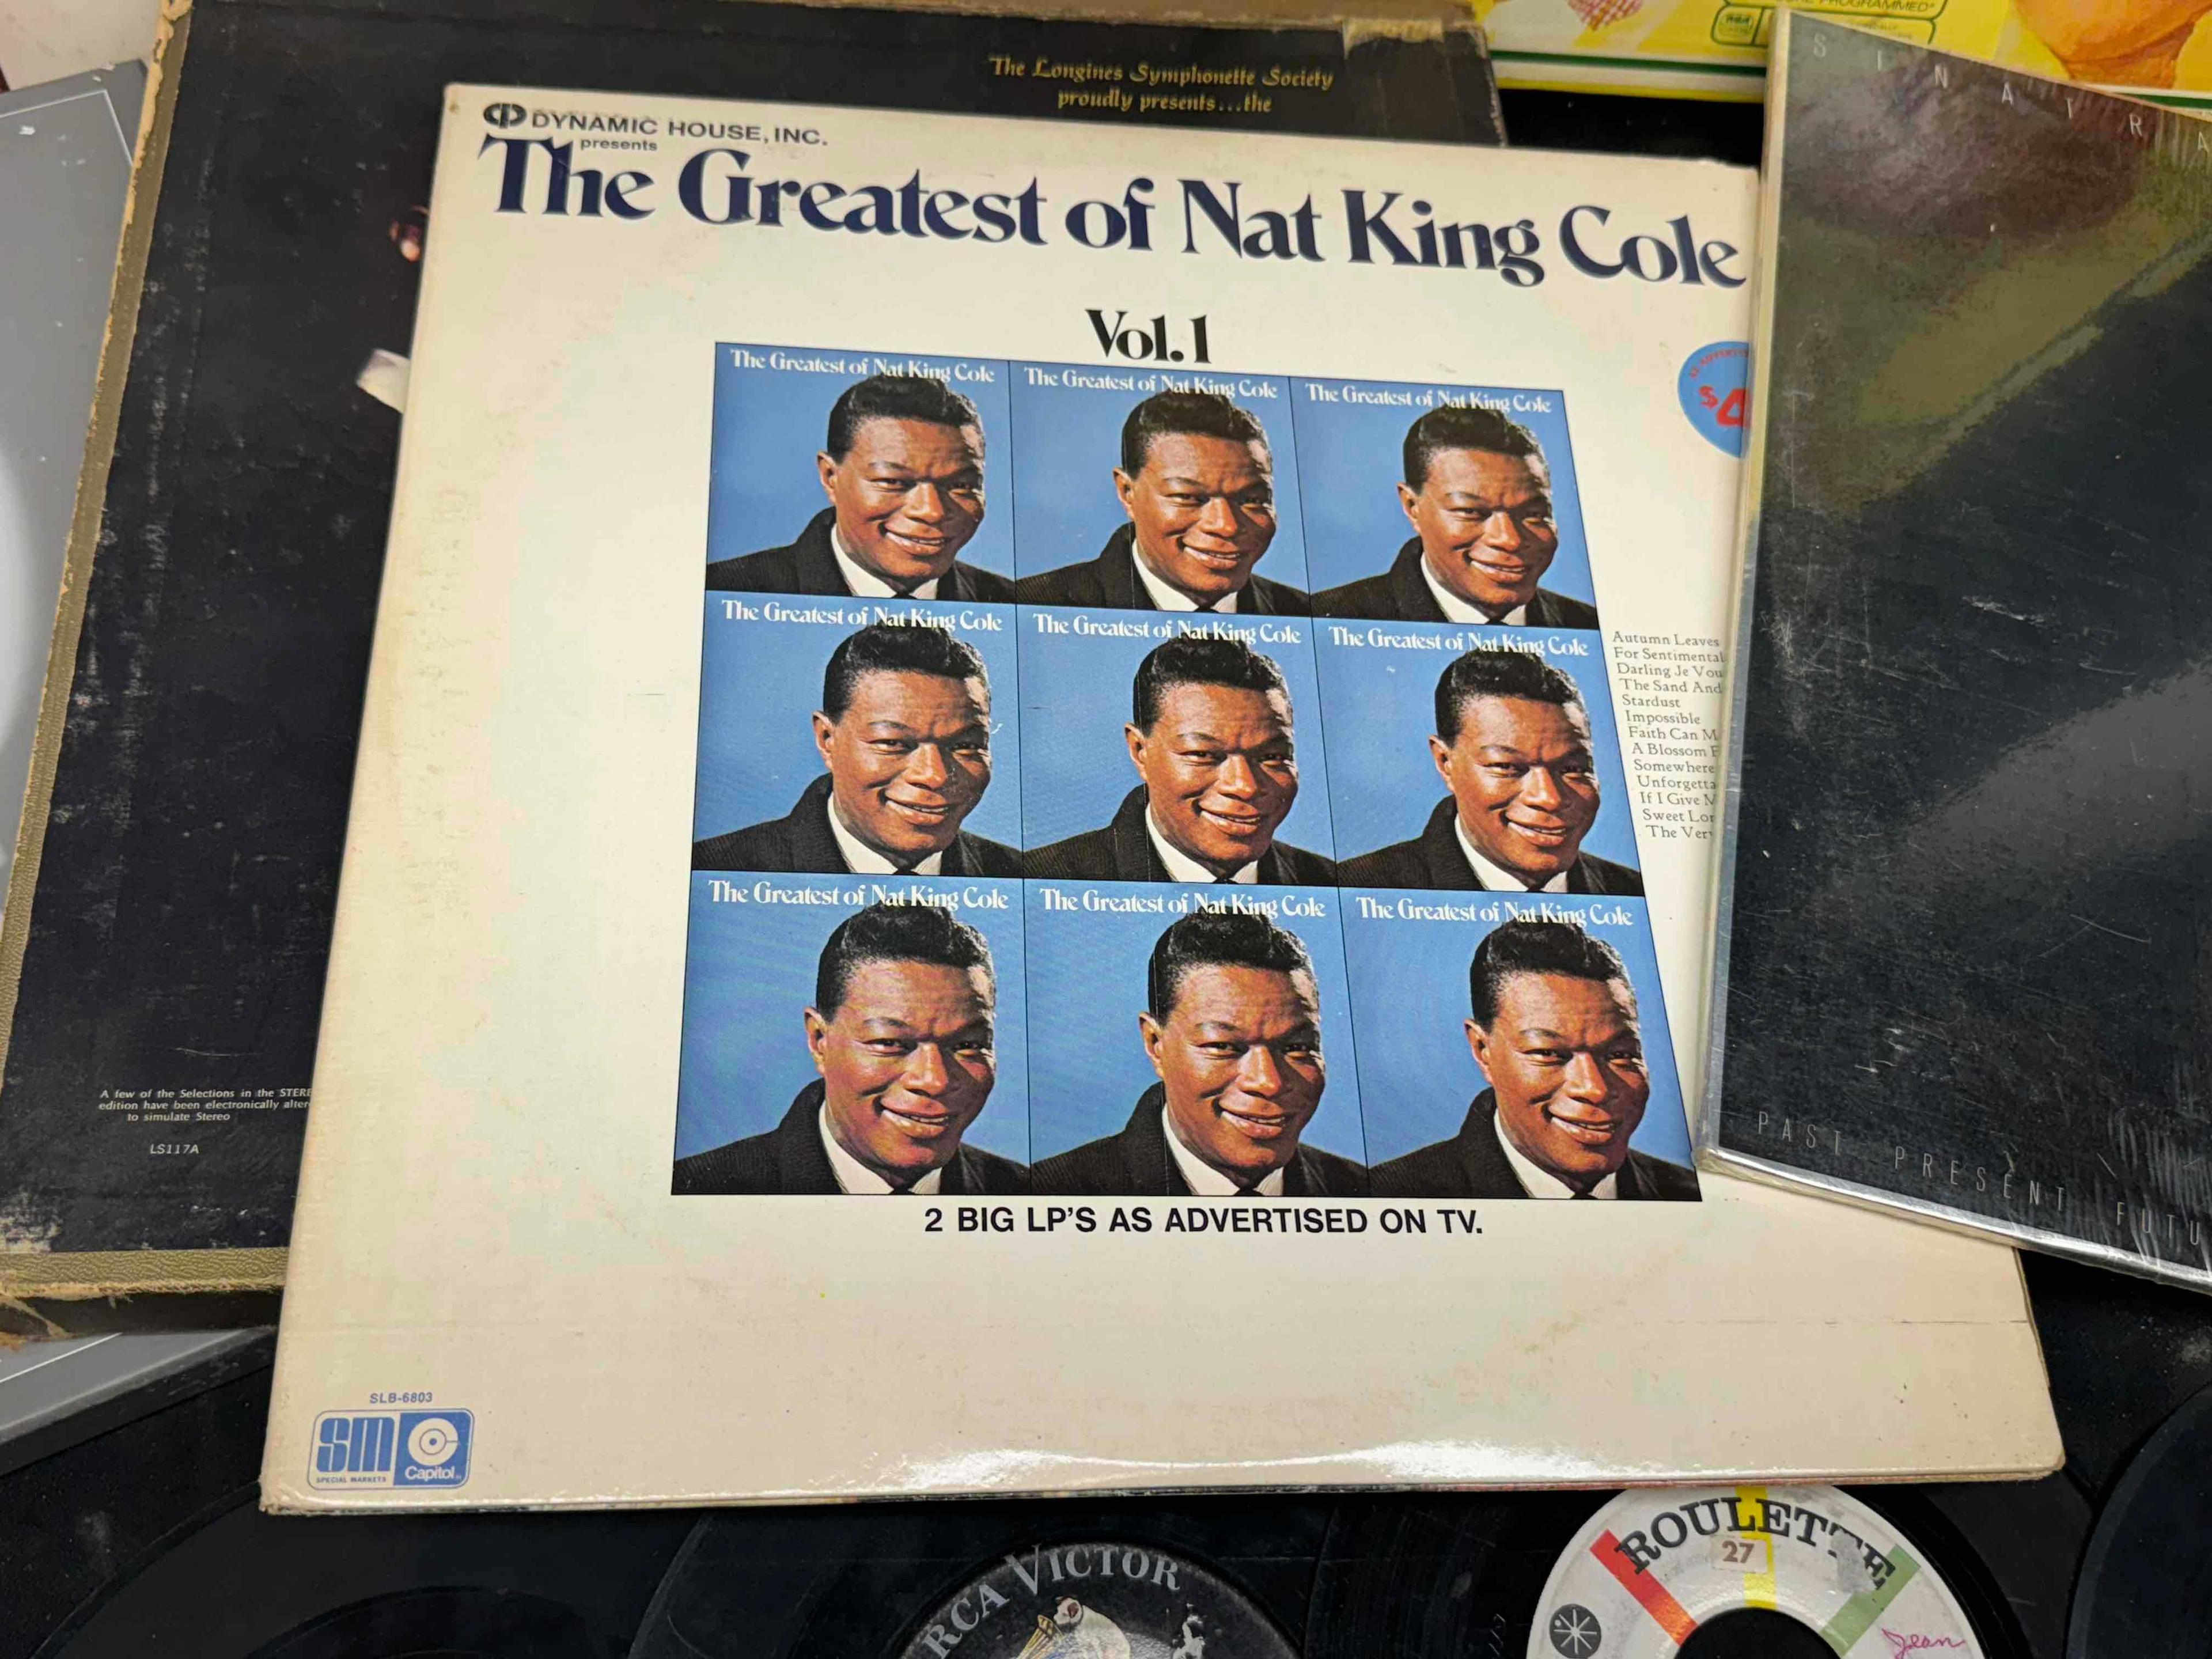 Vintage Vinyl Records 33s and 45s Frank Sinatra, Bring Crosby, Nat King Cole more